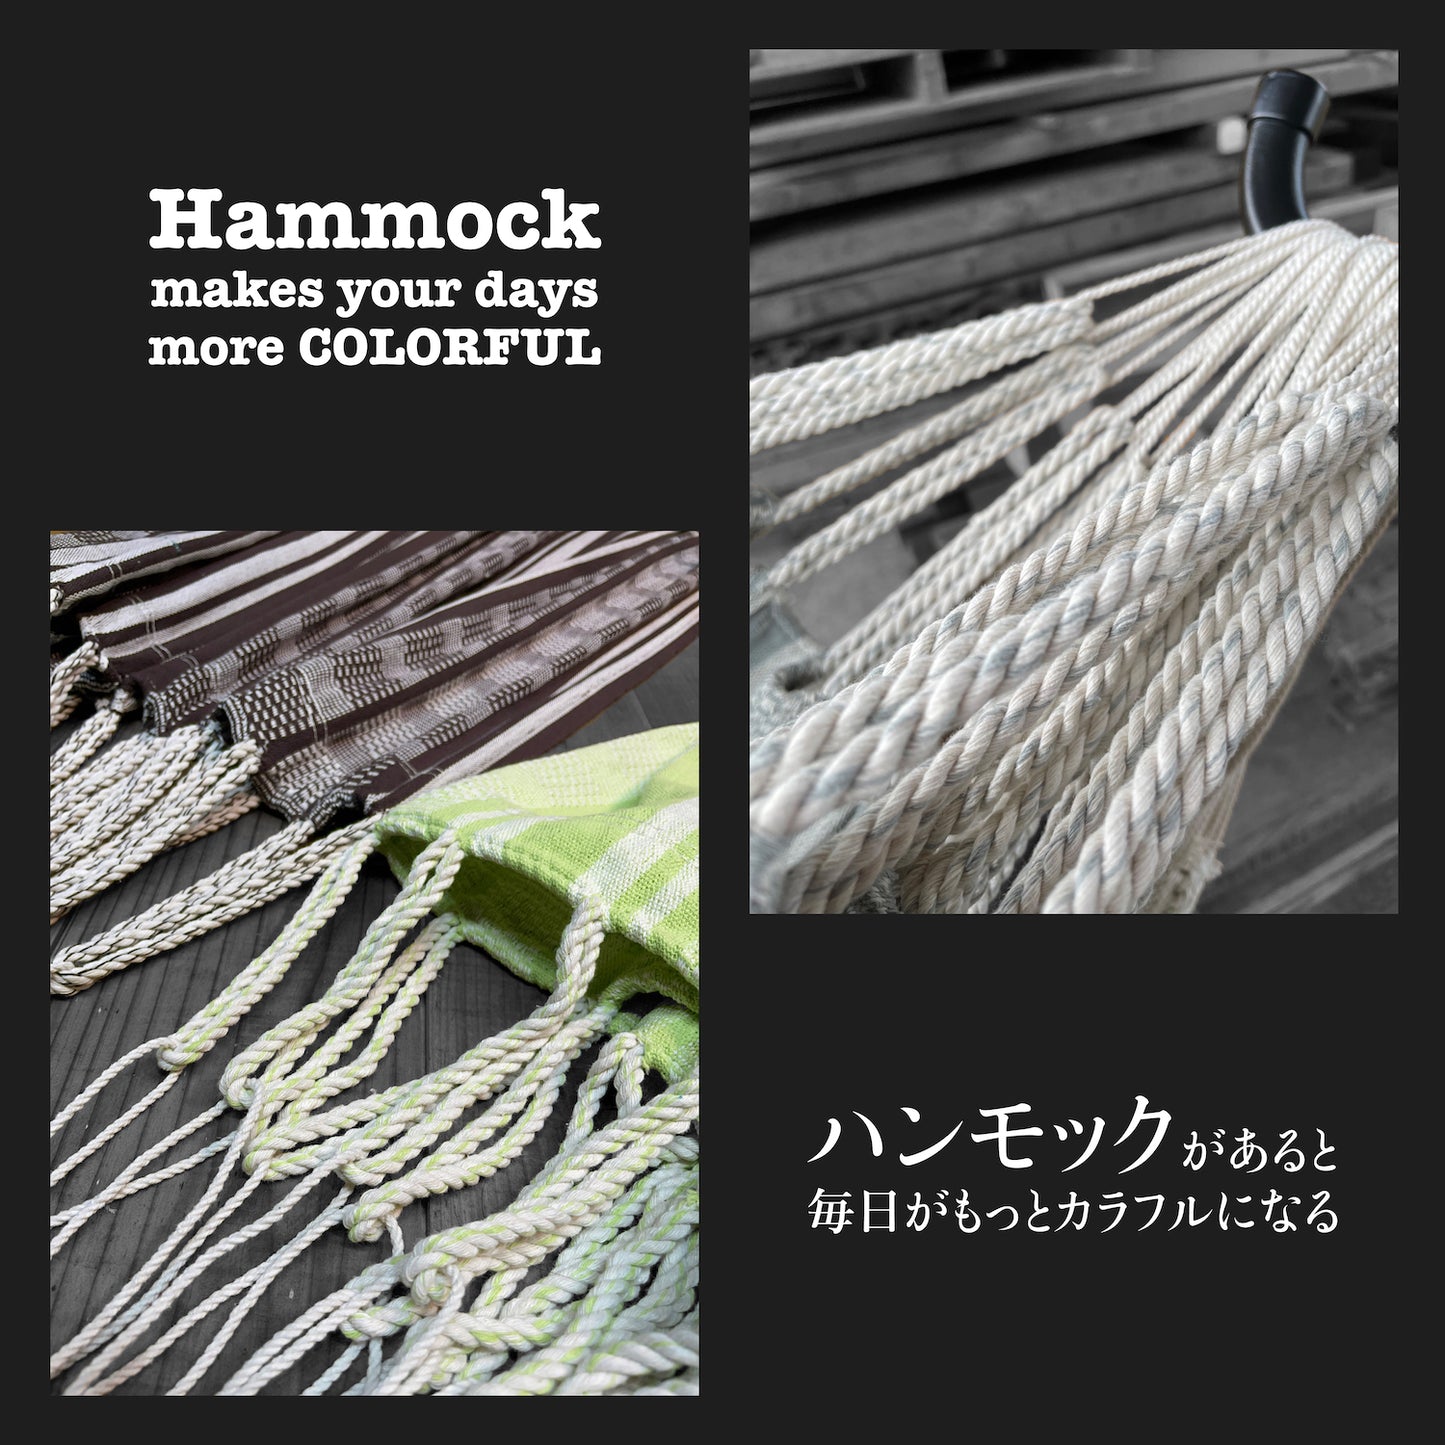 HiHi LABO Hammock 100% cotton Made in Colombia